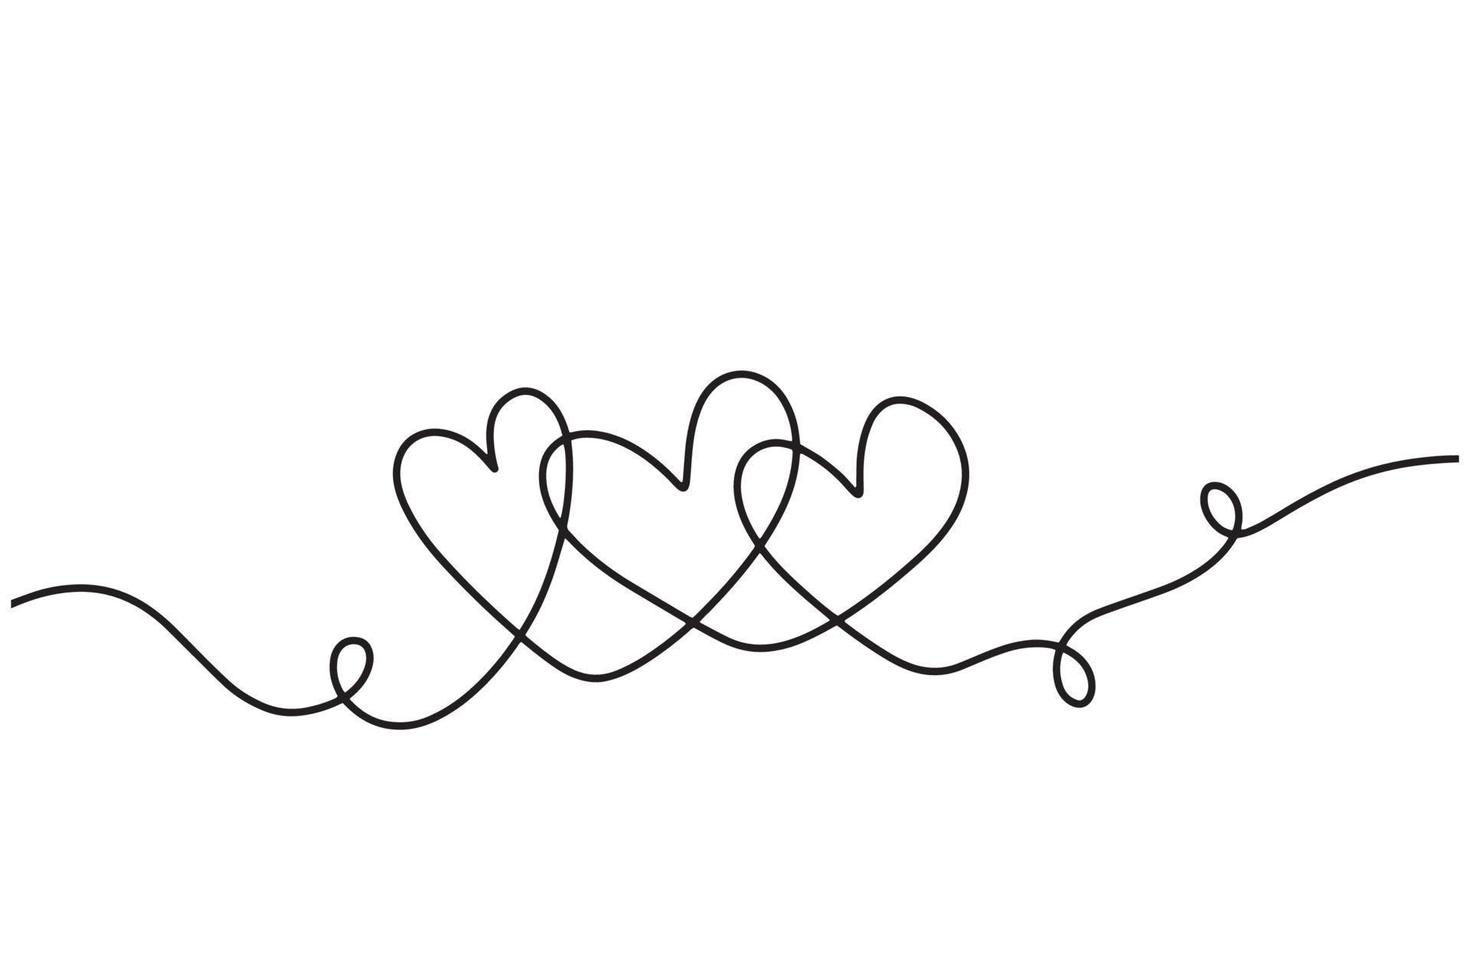 Hearts Family Group Continuous Line Art Drawing. A metaphor for the idea of family love. Happy Family Abstract Symbol for Minimalist Trendy Contemporary Design vector